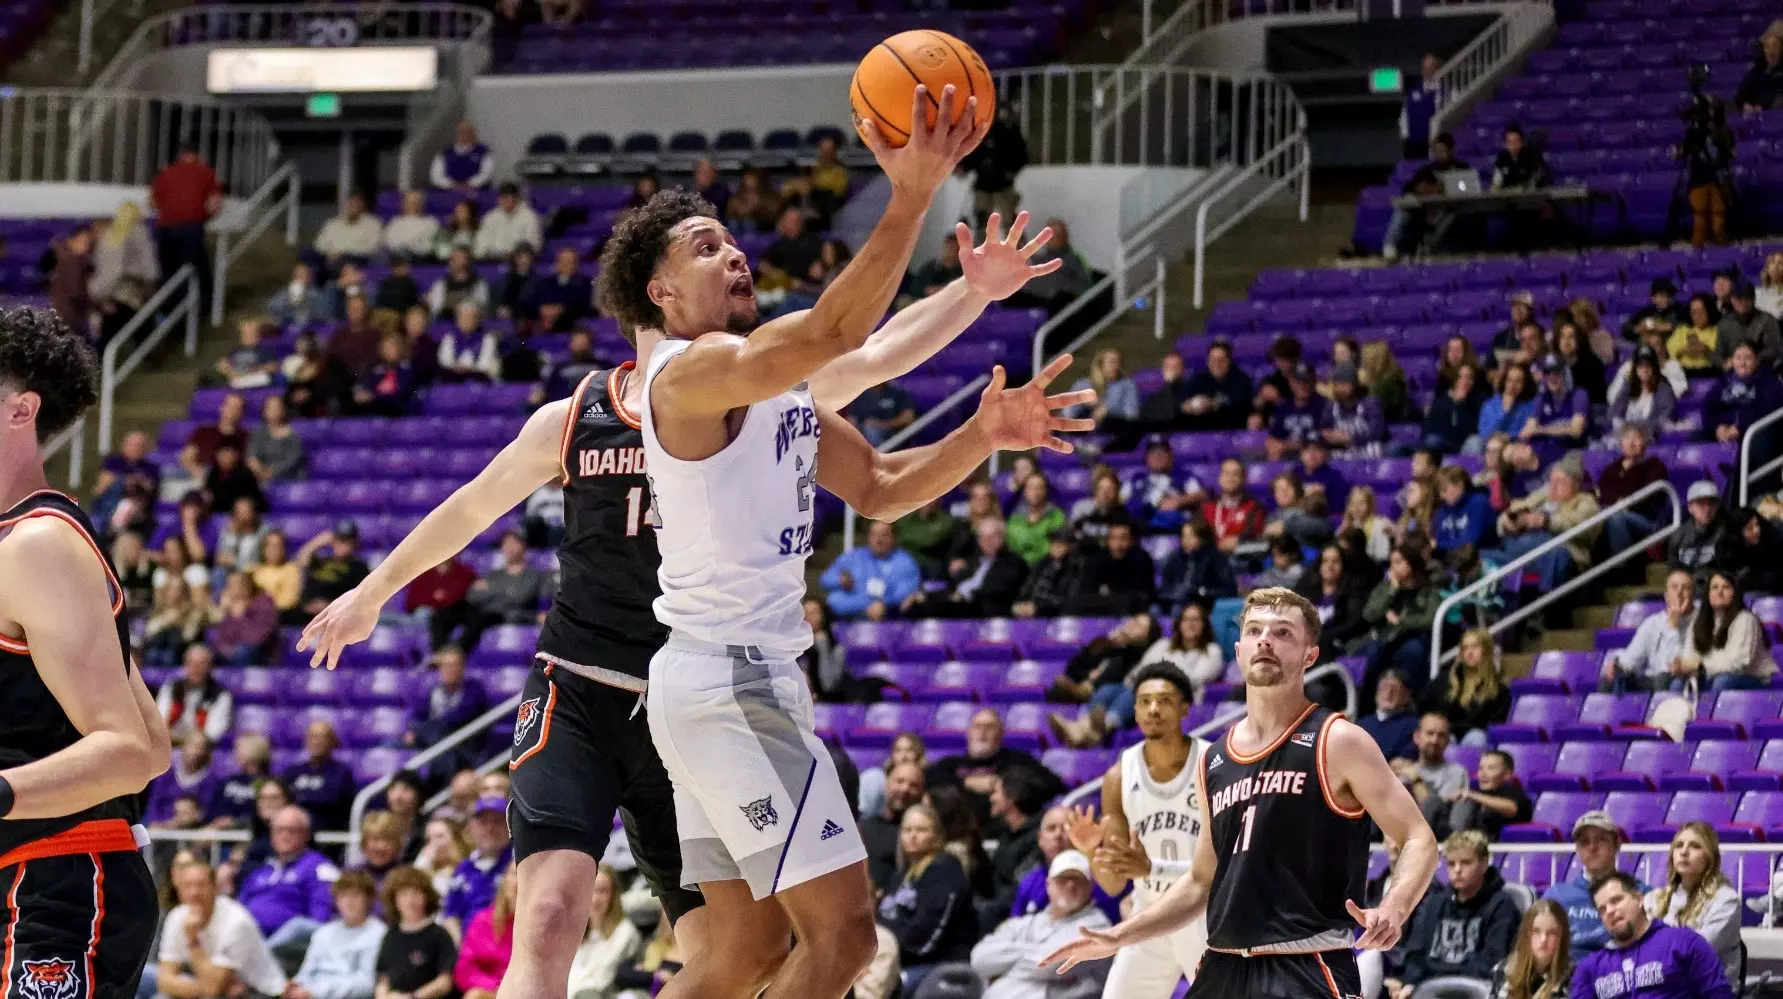 Weber State Mens Guard jumping to reach the ball before an opposing Idaho State player.